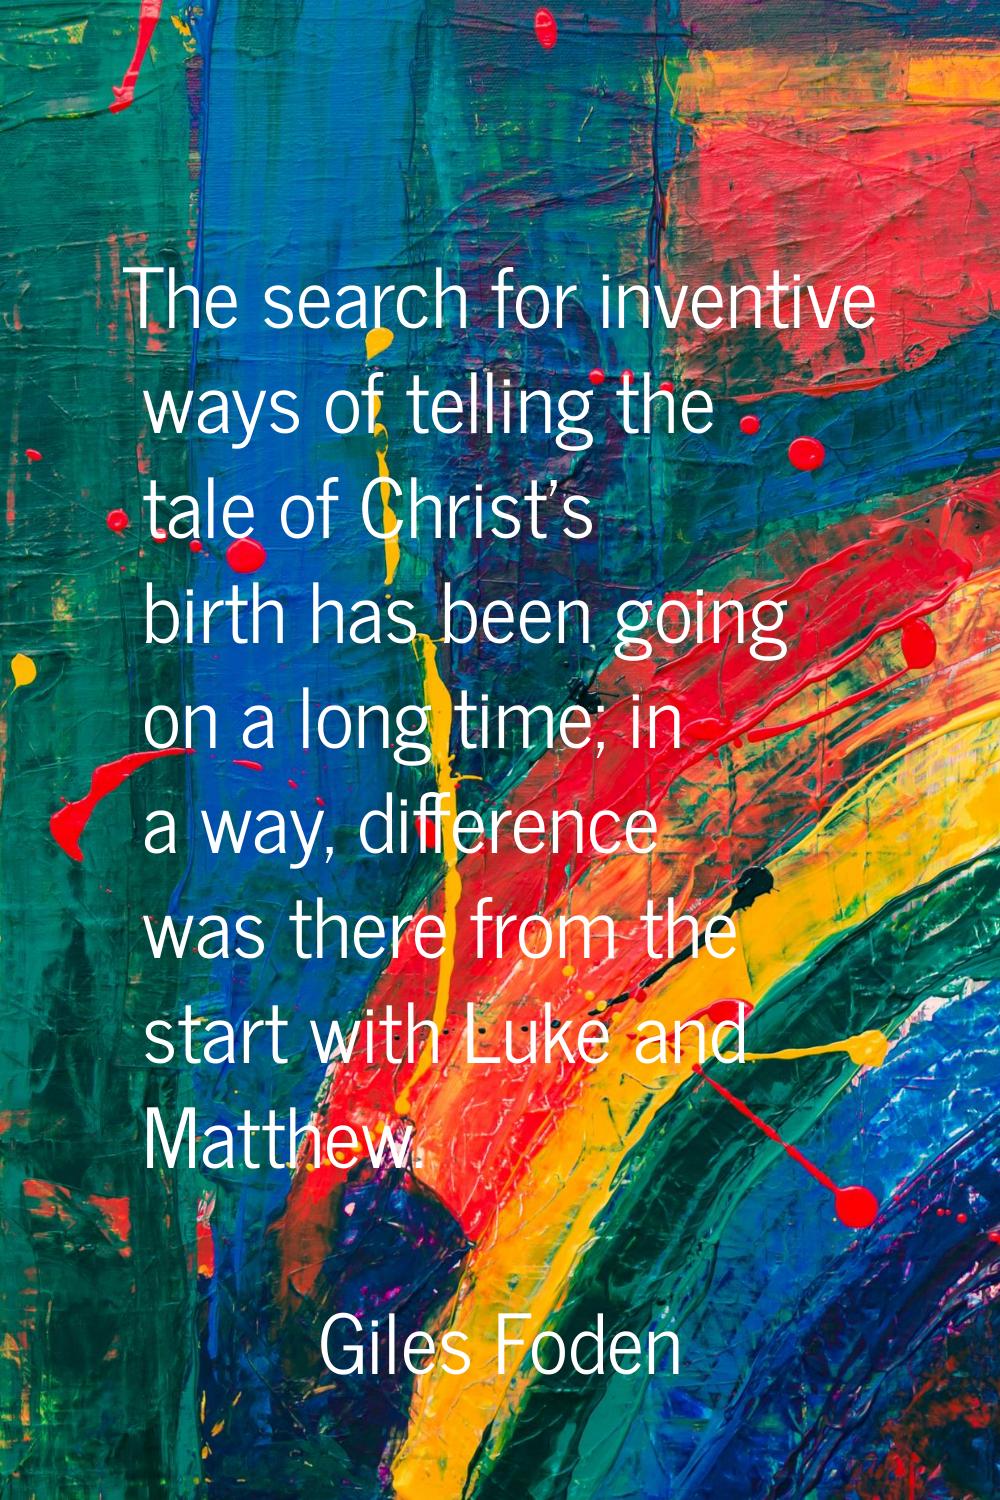 The search for inventive ways of telling the tale of Christ's birth has been going on a long time; 